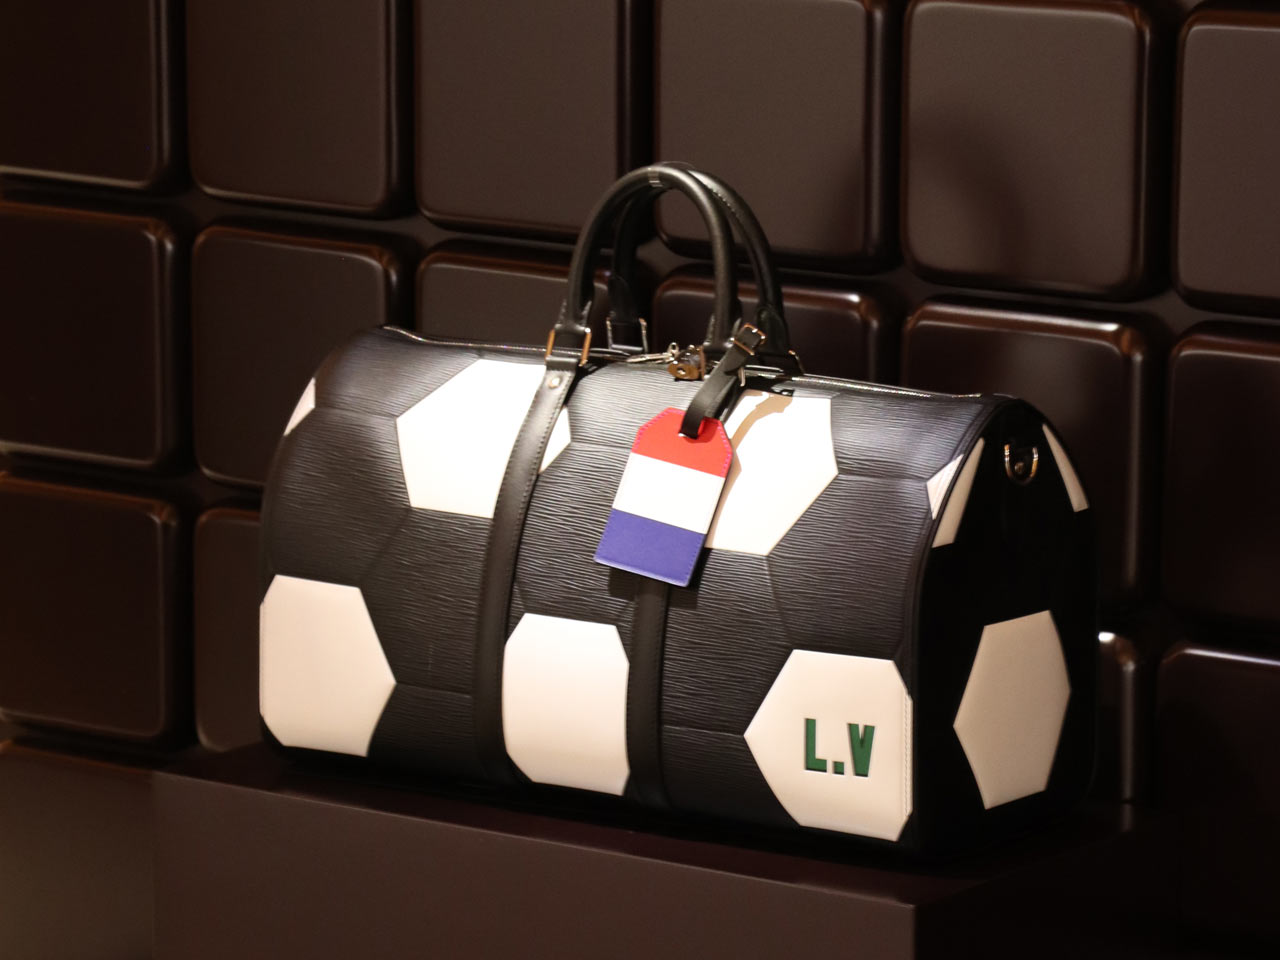 FIFA commissions louis vuitton to design traveling case for world